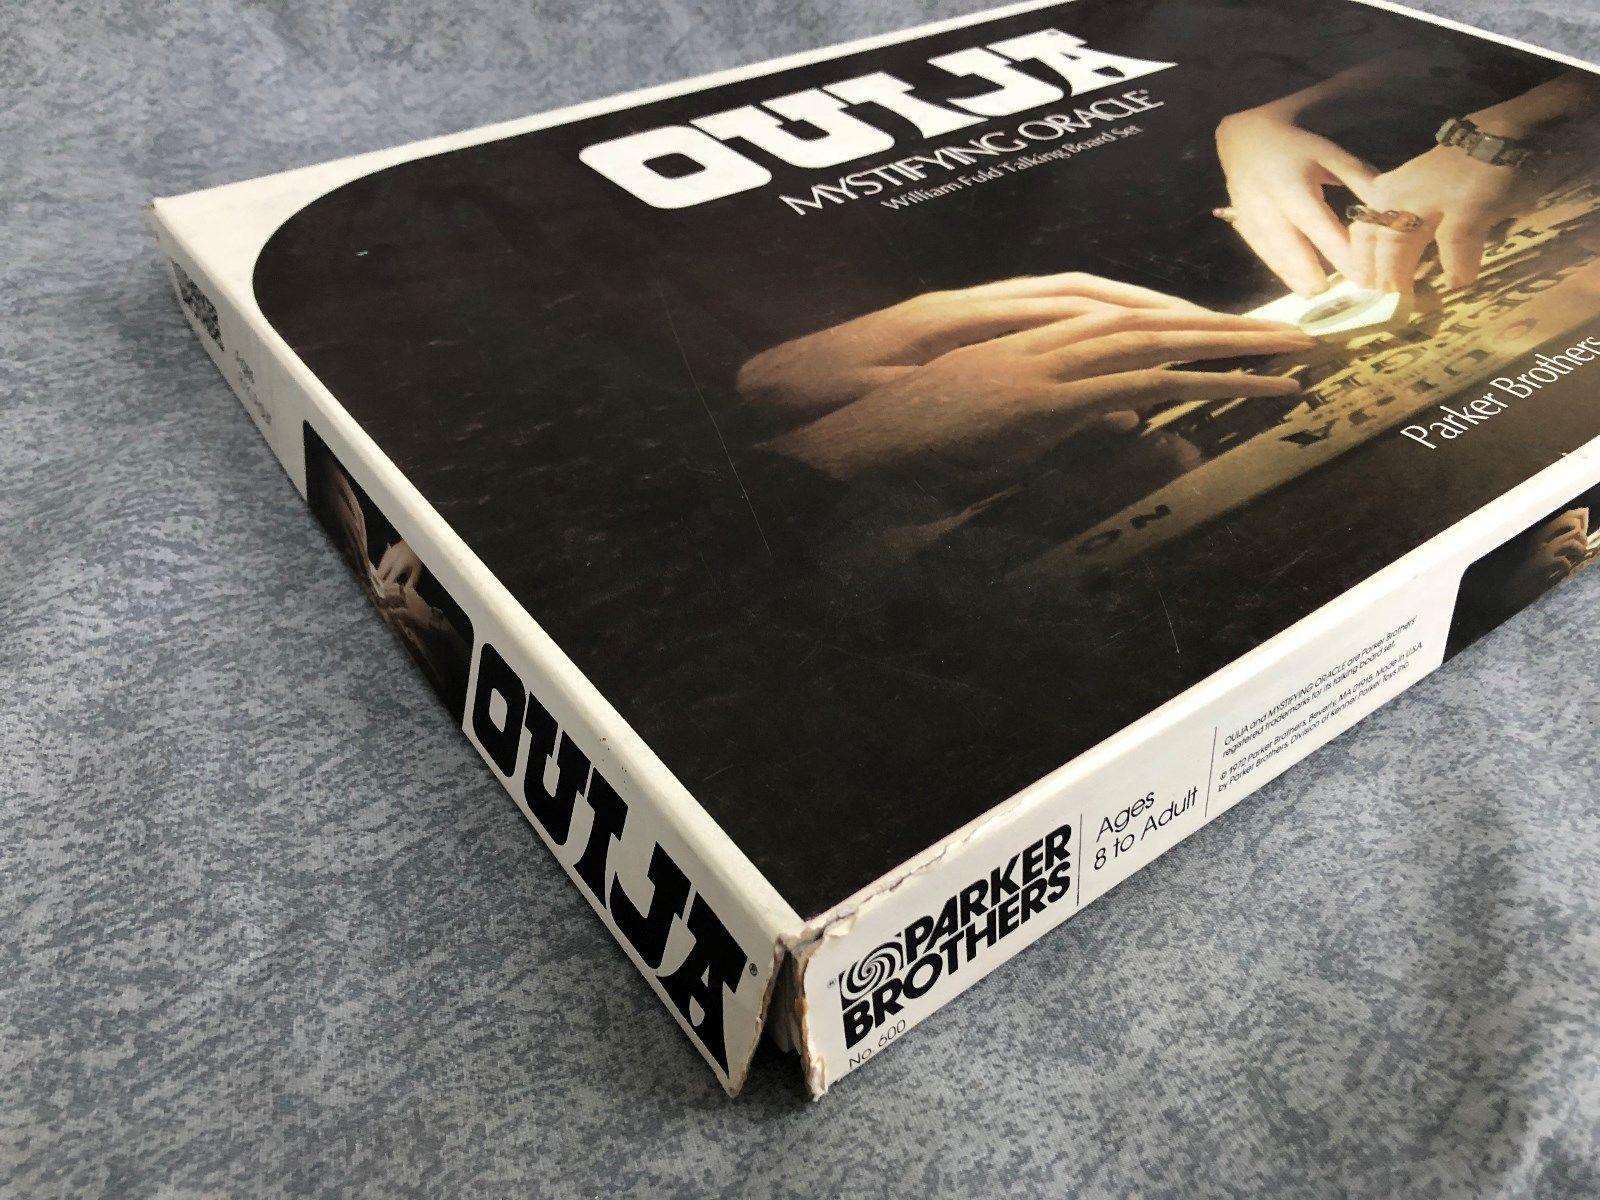 Parker Brothers Ouija Packaging 1972 Edition Fonts In Use Images, Photos, Reviews